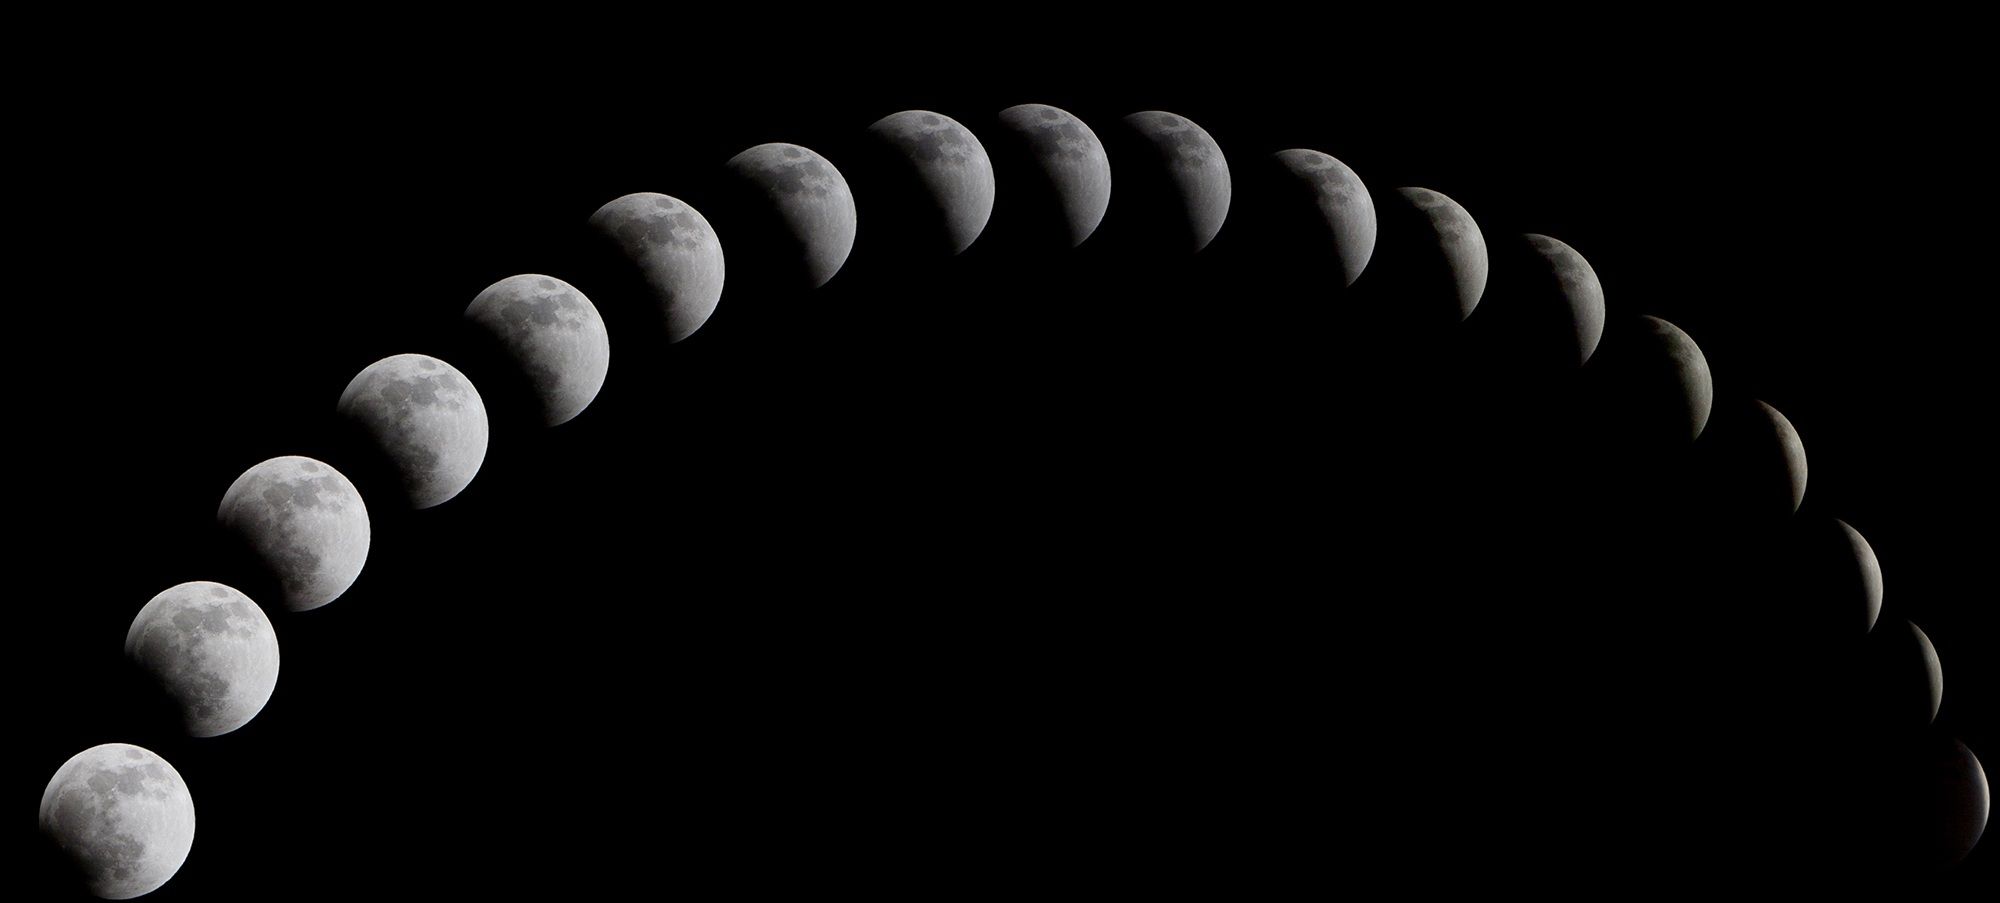 The progression of lunar phases through a cycle.  This is the cycle of shapes in a lunar eclipse - similar but not identical to the monthly cycle.